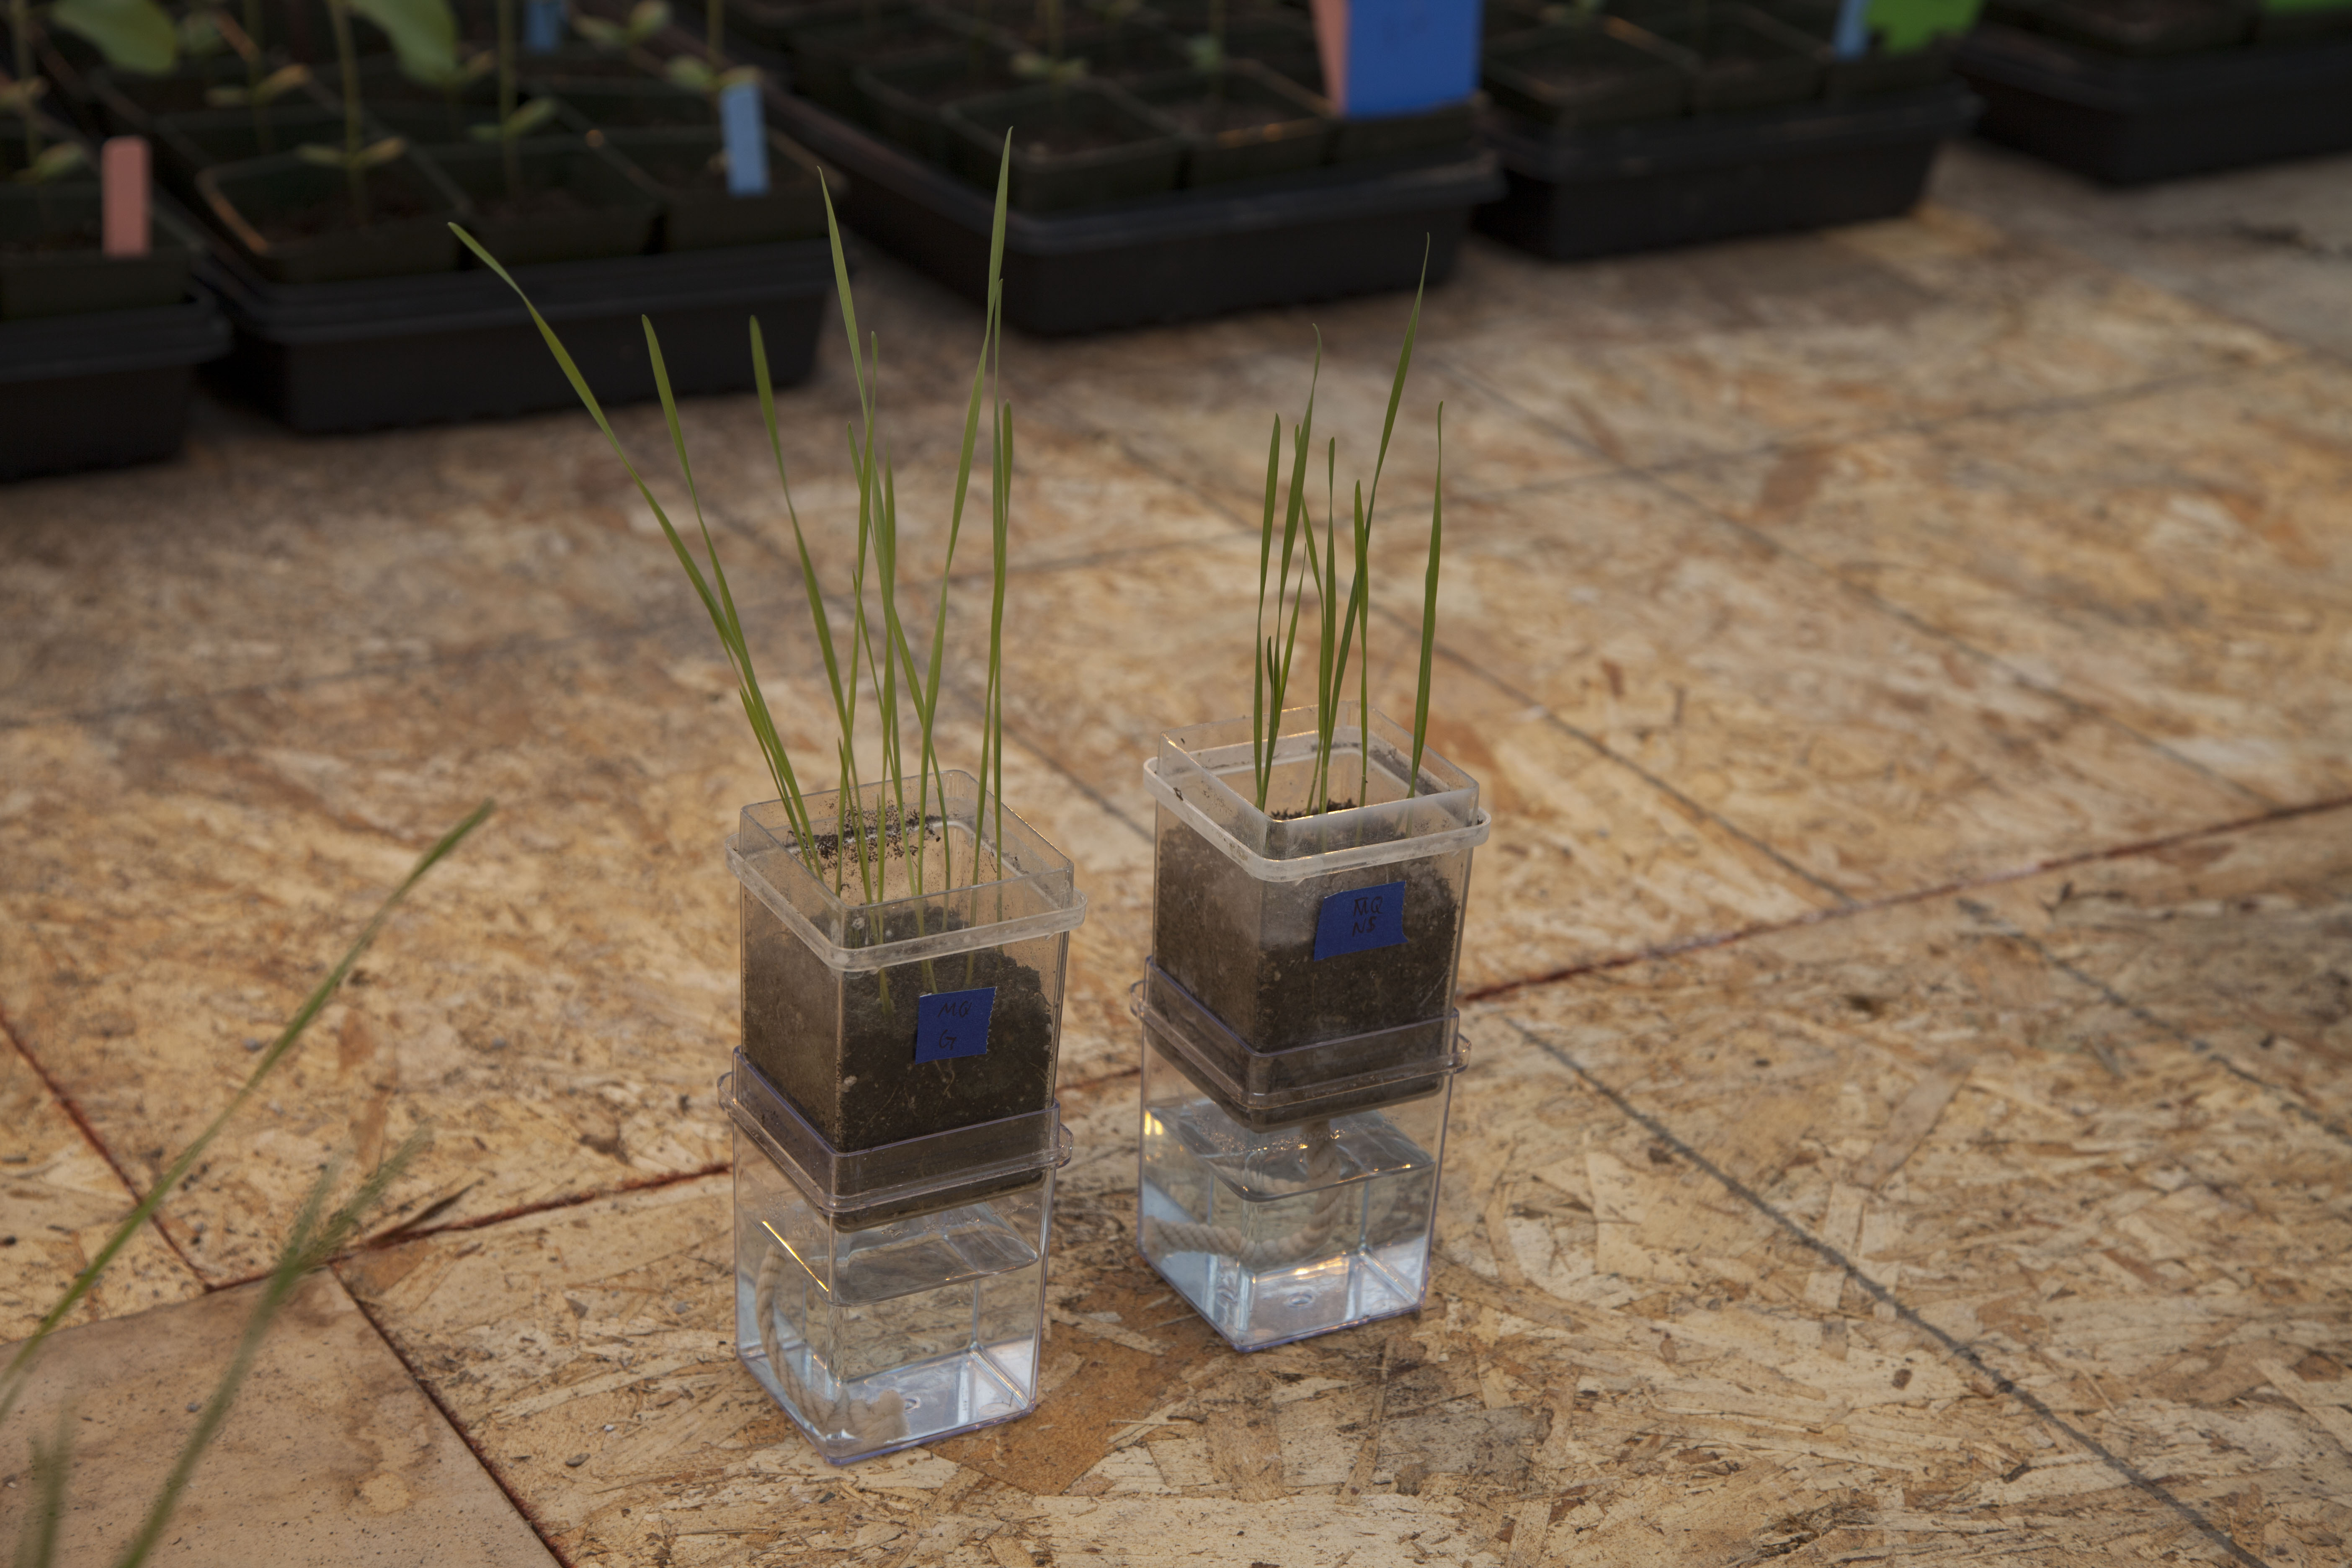 Rice plants treated with endophytes (left) show more biomass growth than untreated plants (right). 